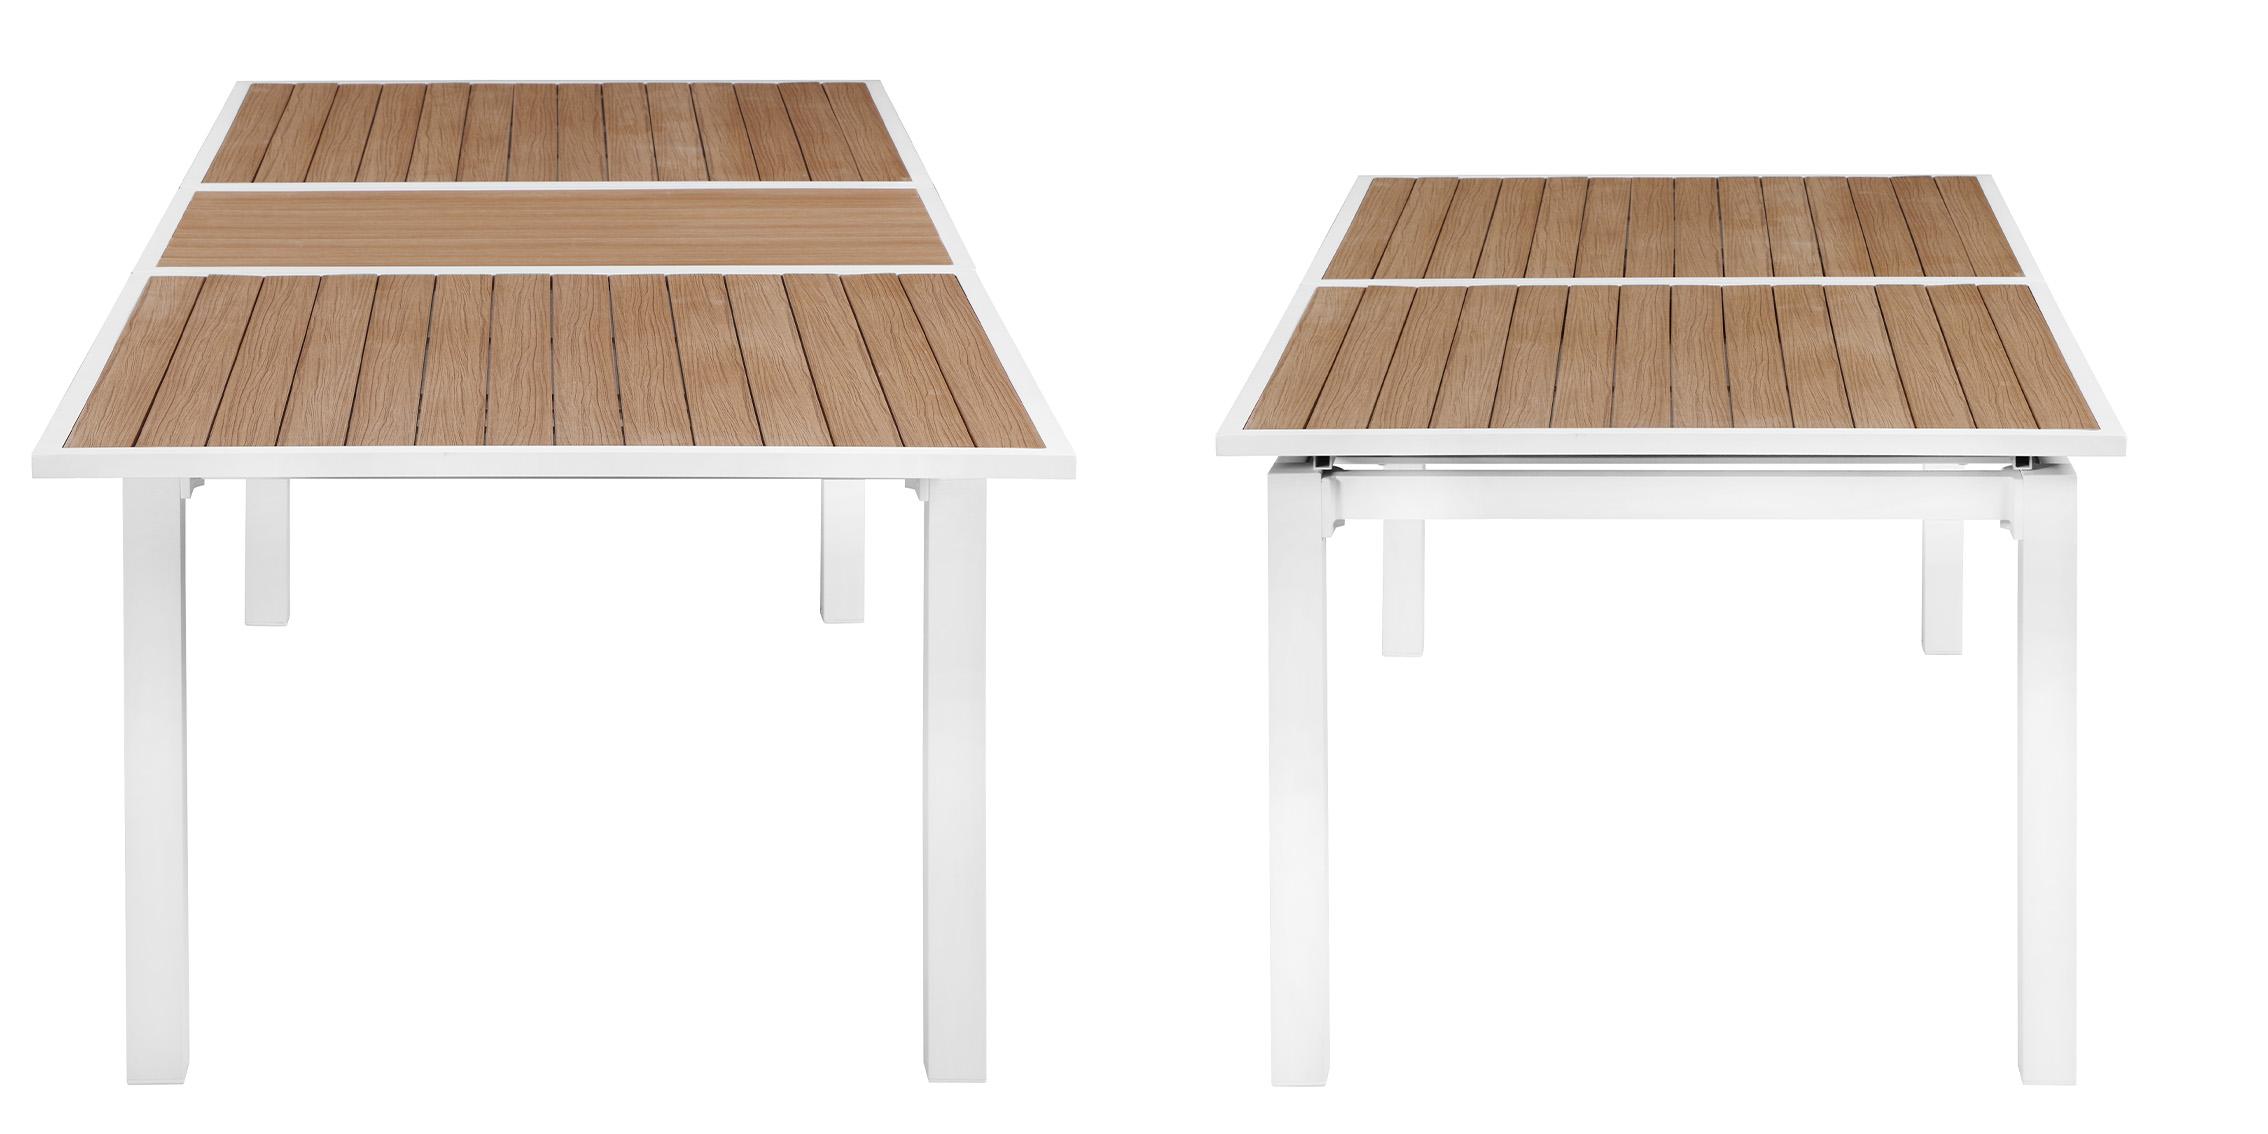 

    
365-T Meridian Furniture Patio Dining Table
